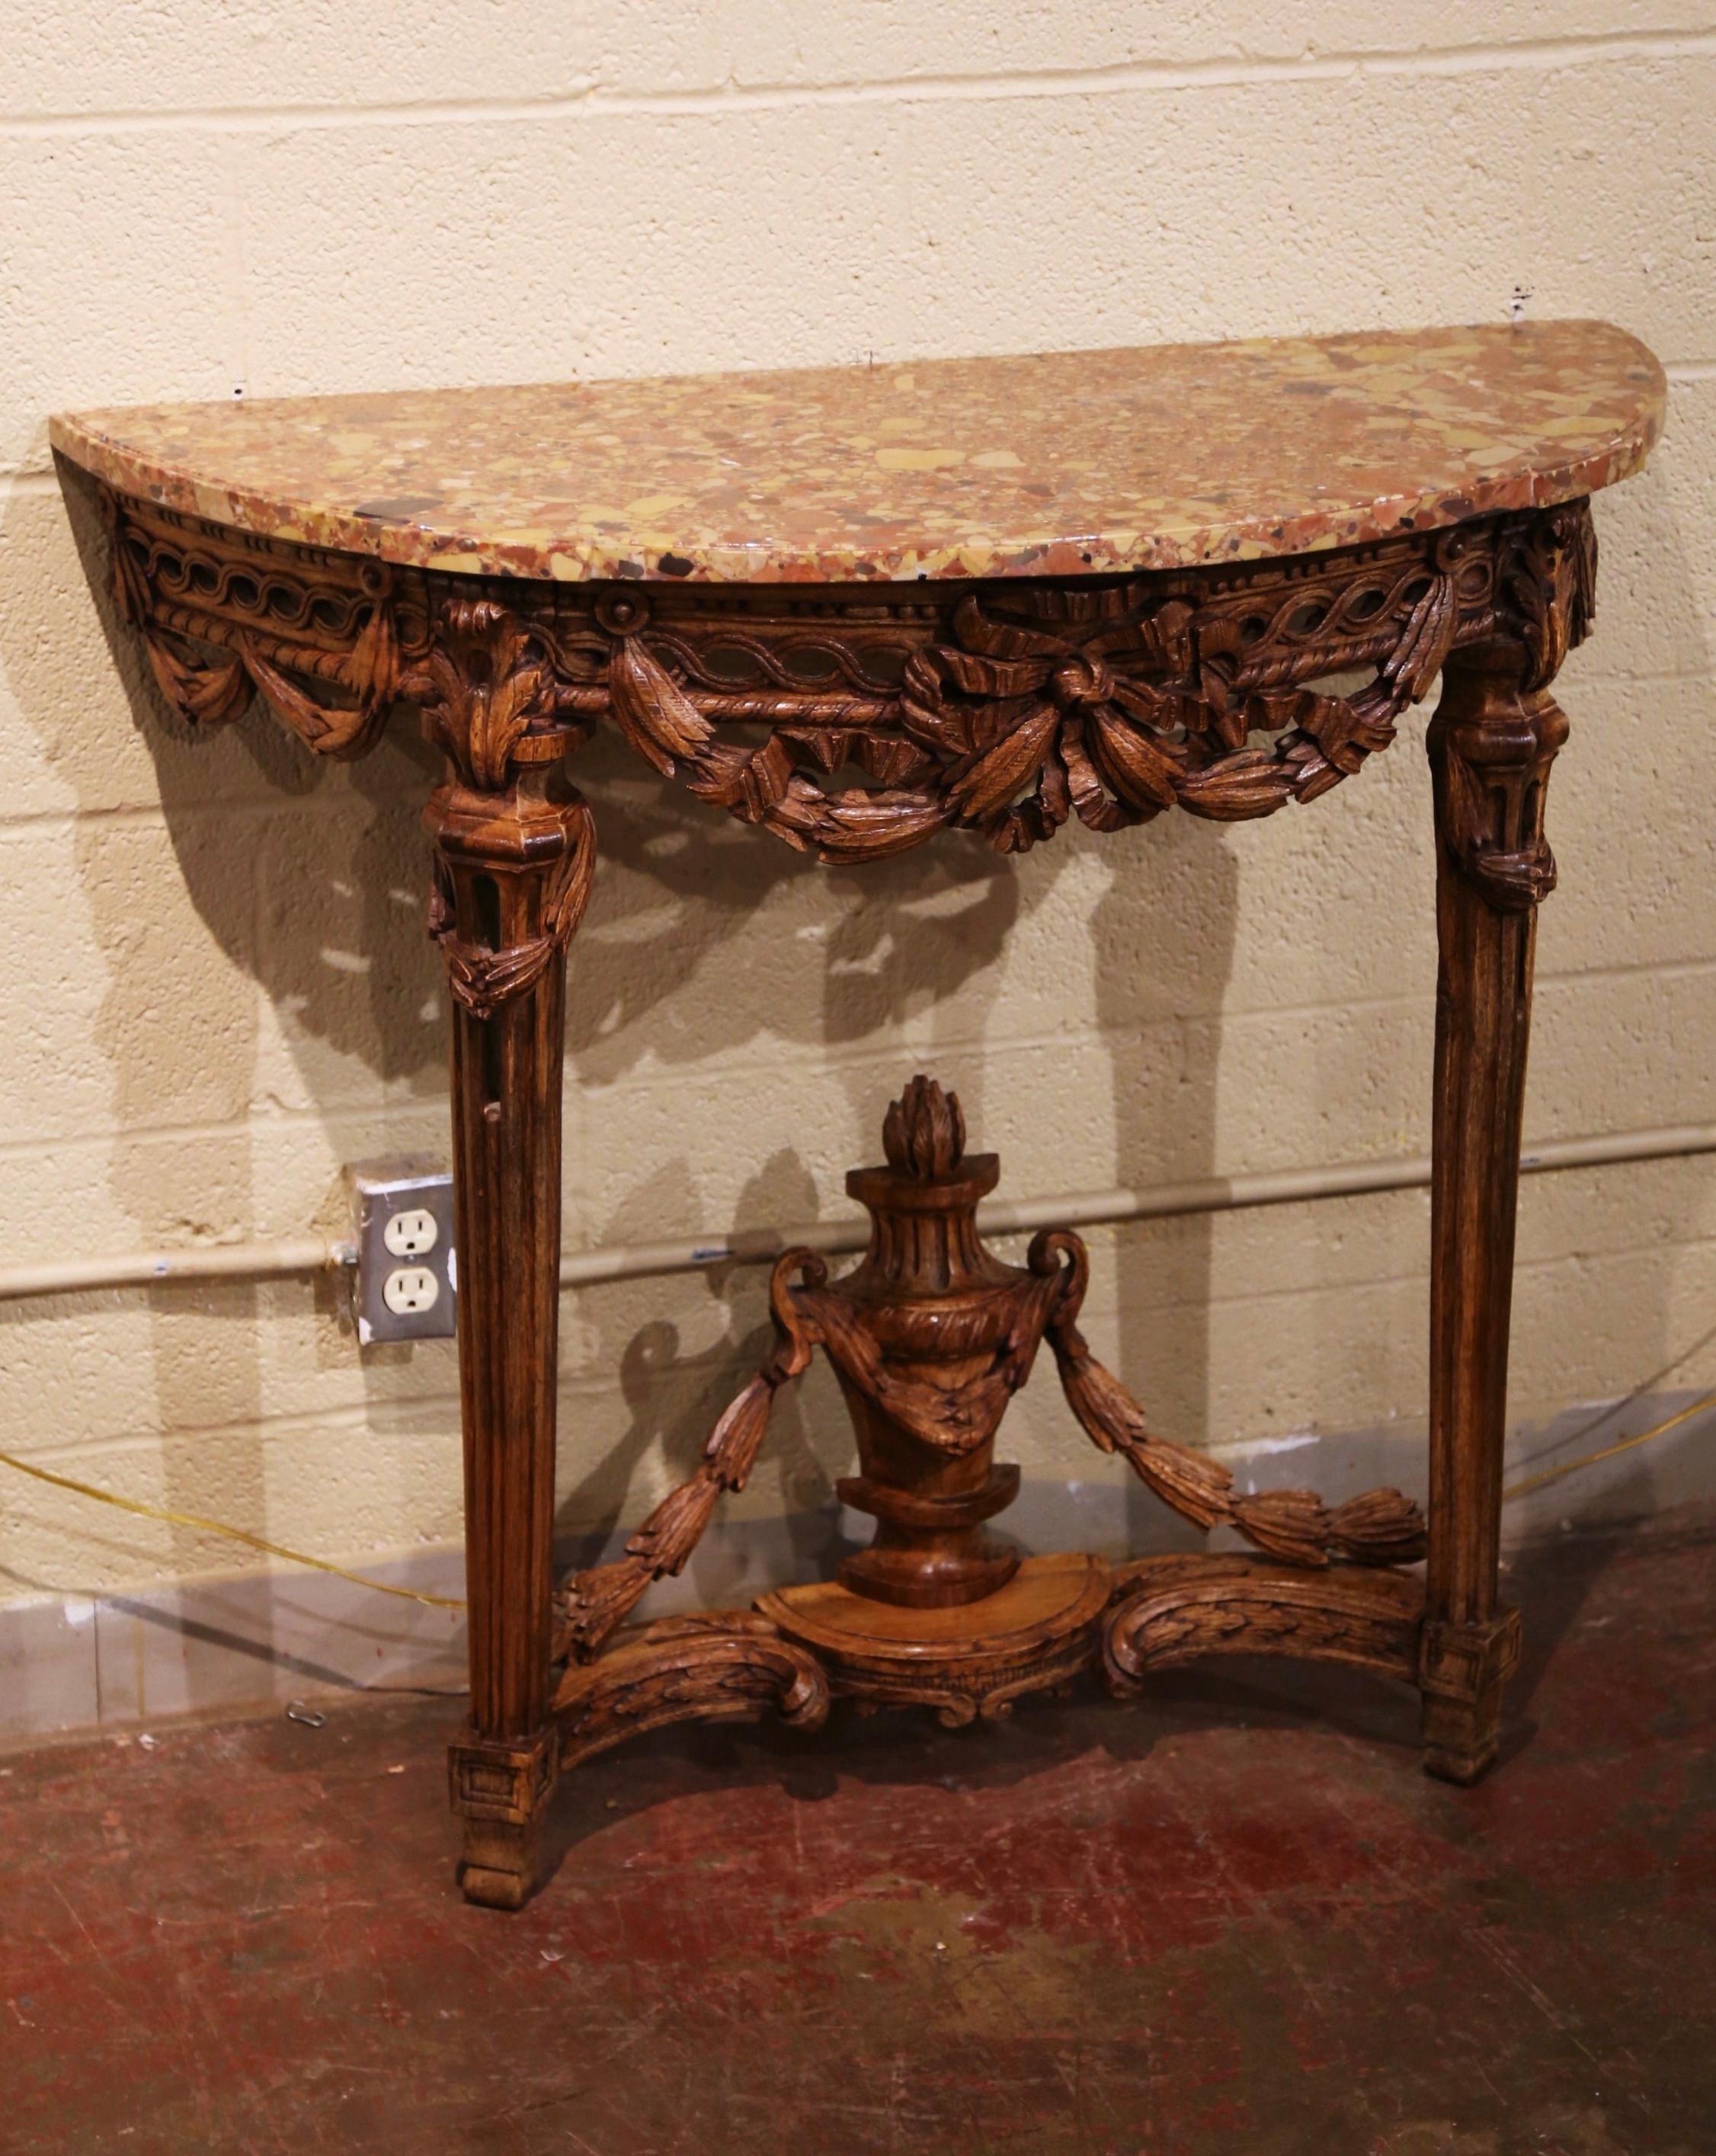 Decorate an entry or hallway with this elegant Louis XVI period demi-lune console table. Crafted in France circa 1780, and built of oak, the tall antique console shaped as a half moon, stands on fluted and tapered legs ending at the base with a